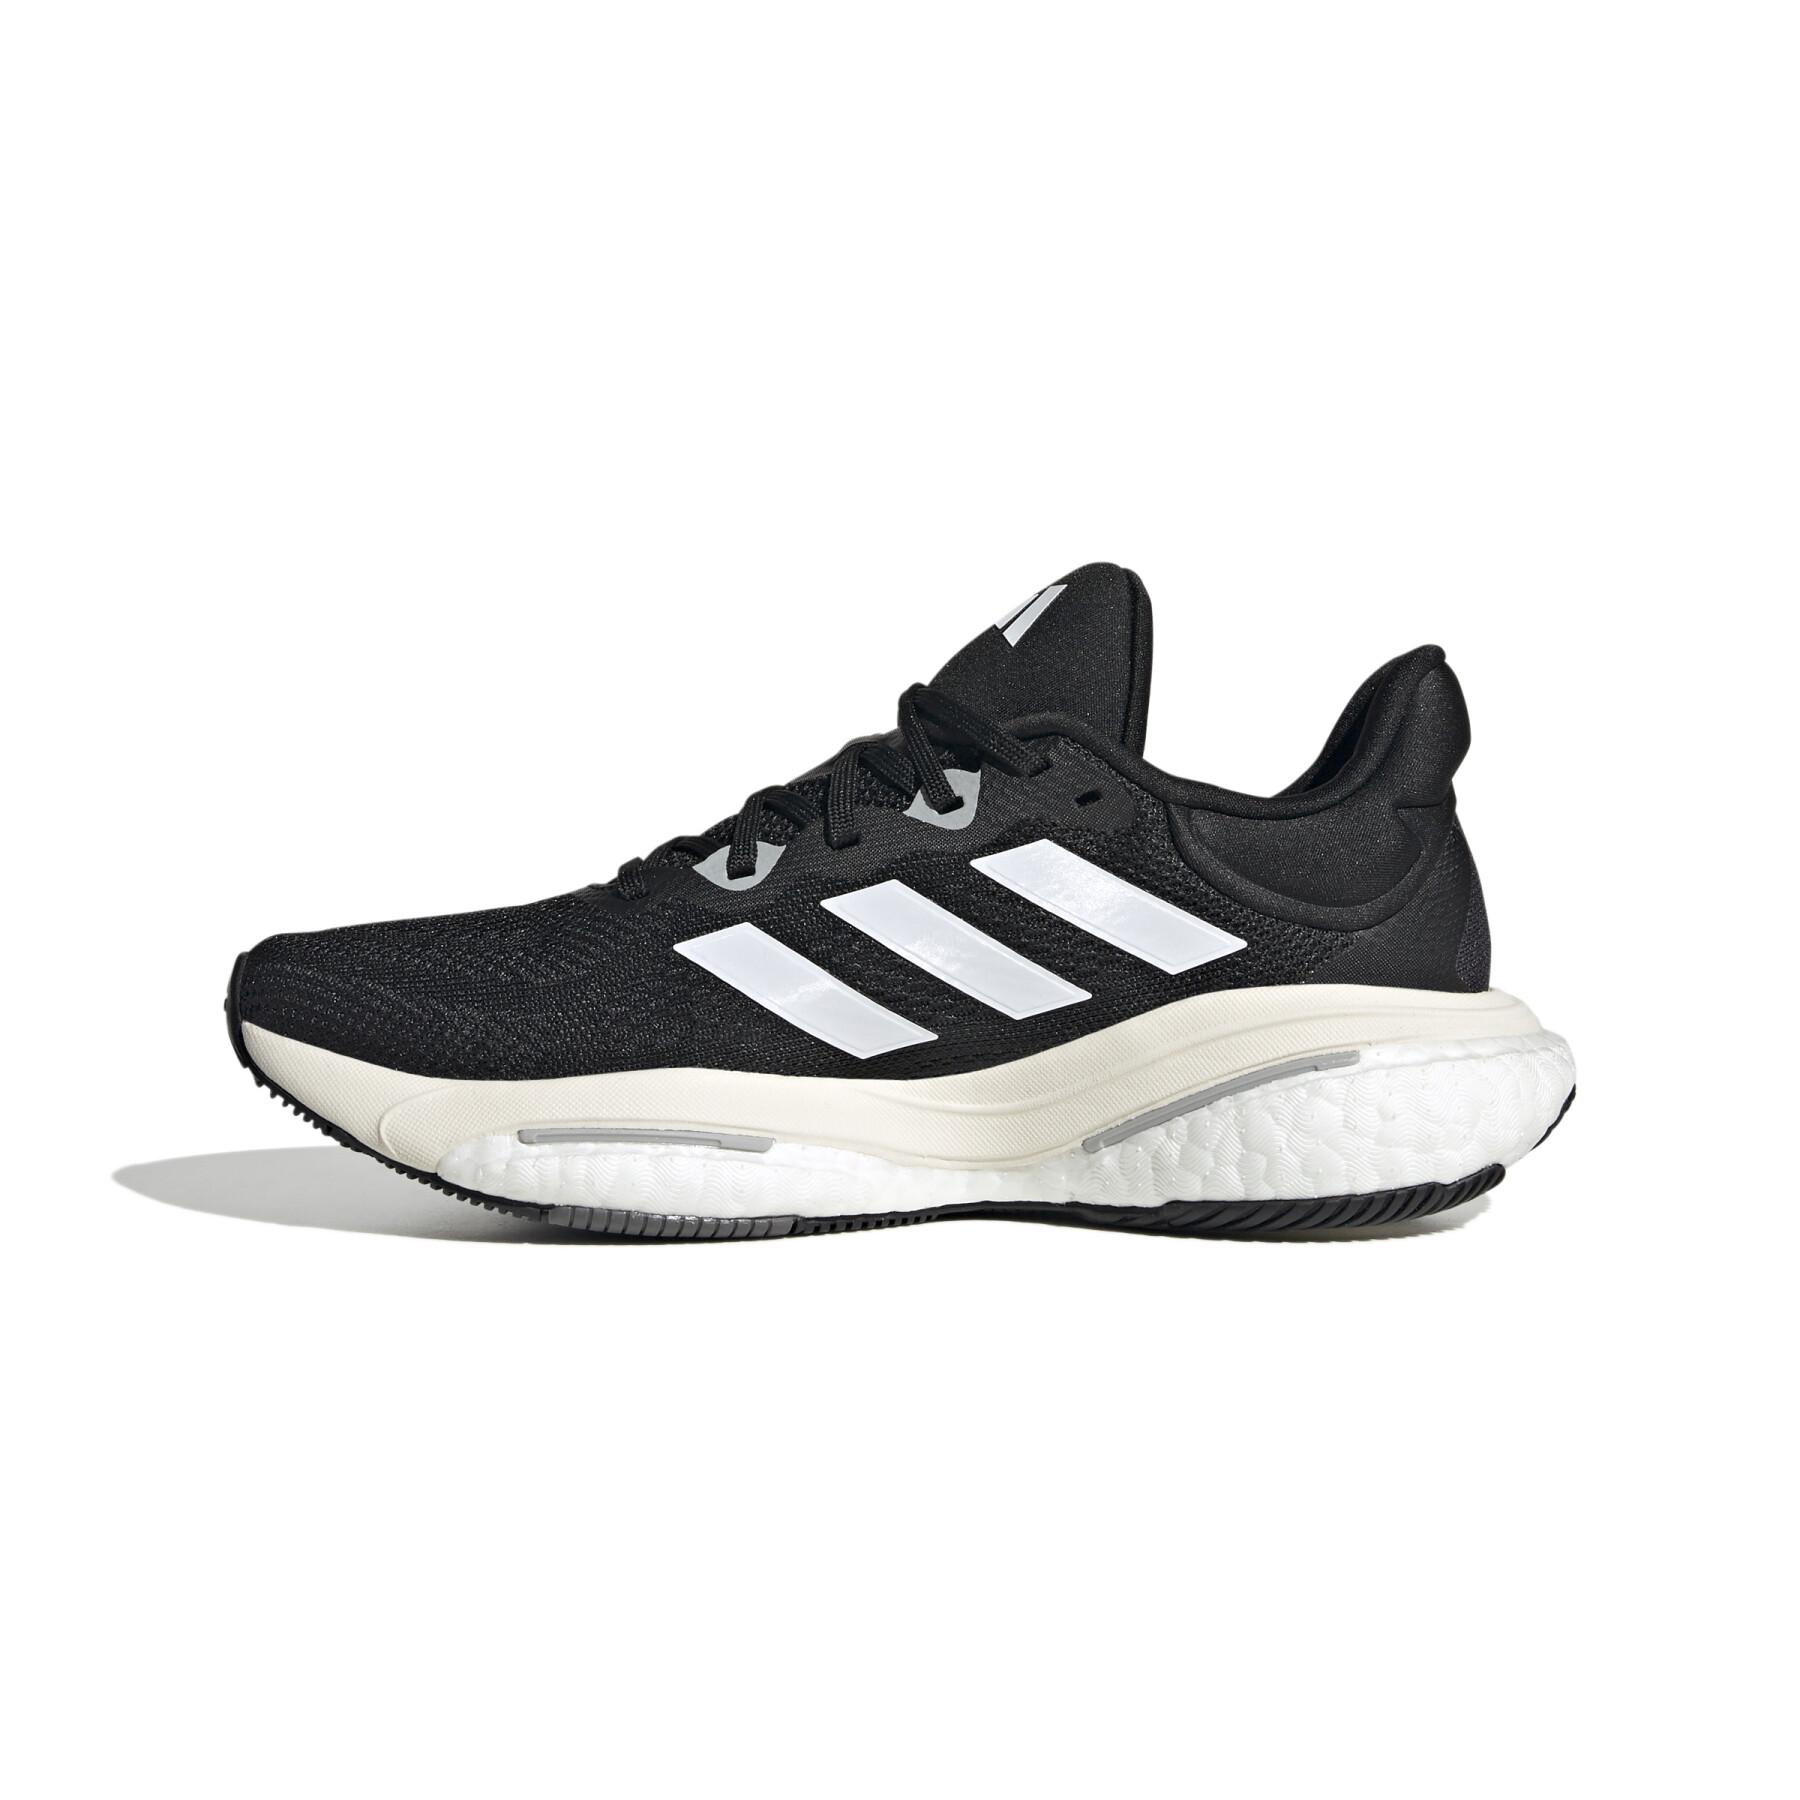 Women's running shoes adidas Solarglide 6